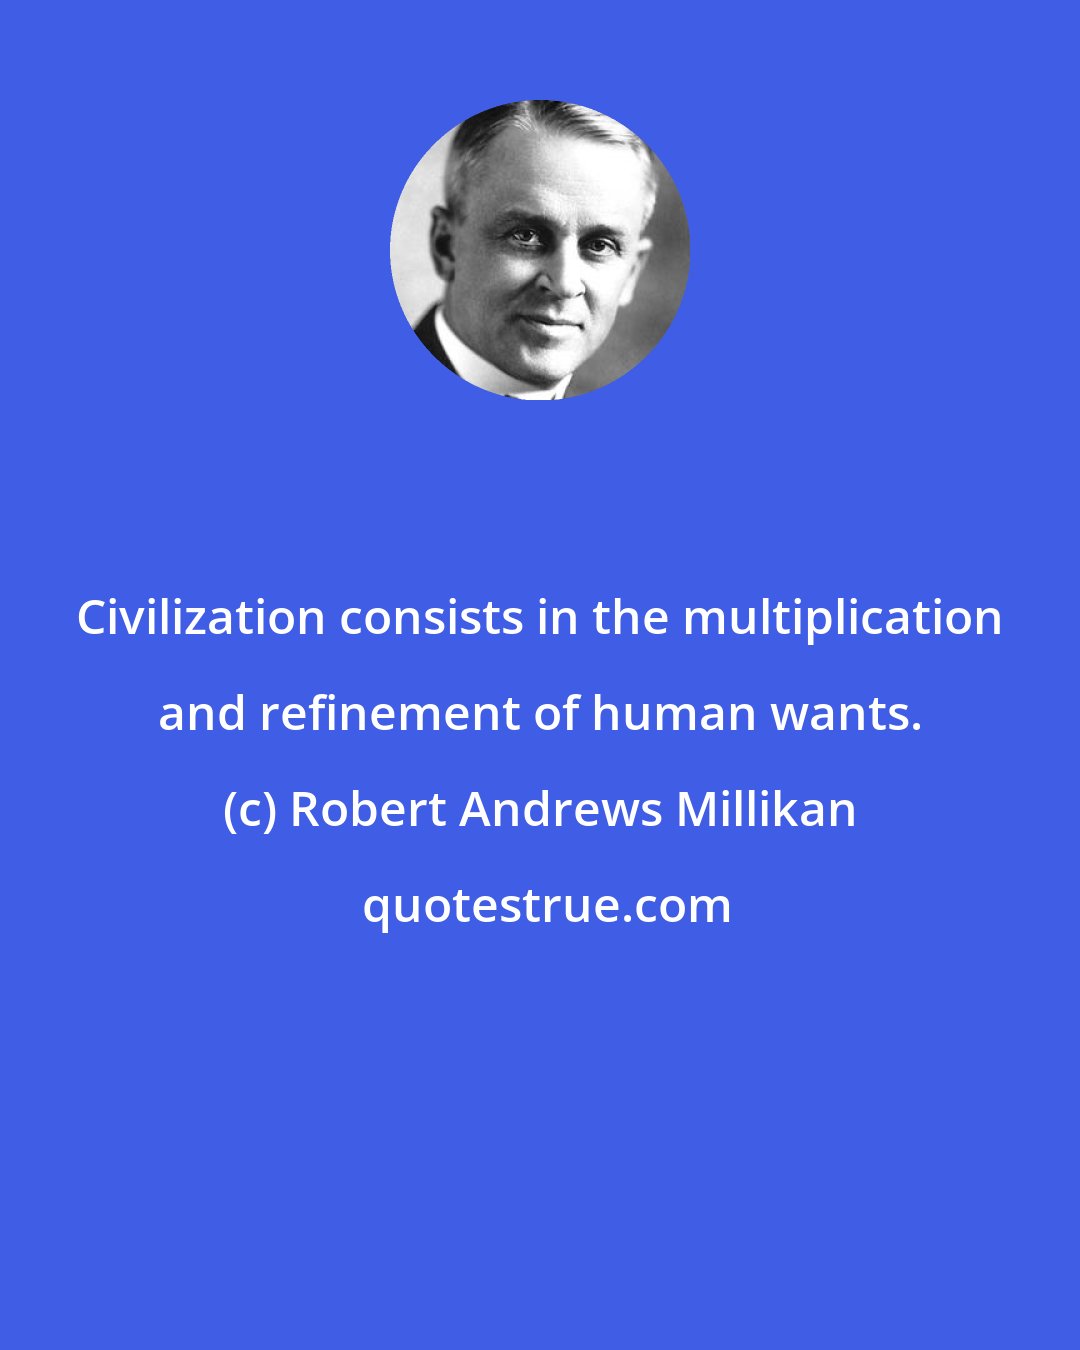 Robert Andrews Millikan: Civilization consists in the multiplication and refinement of human wants.